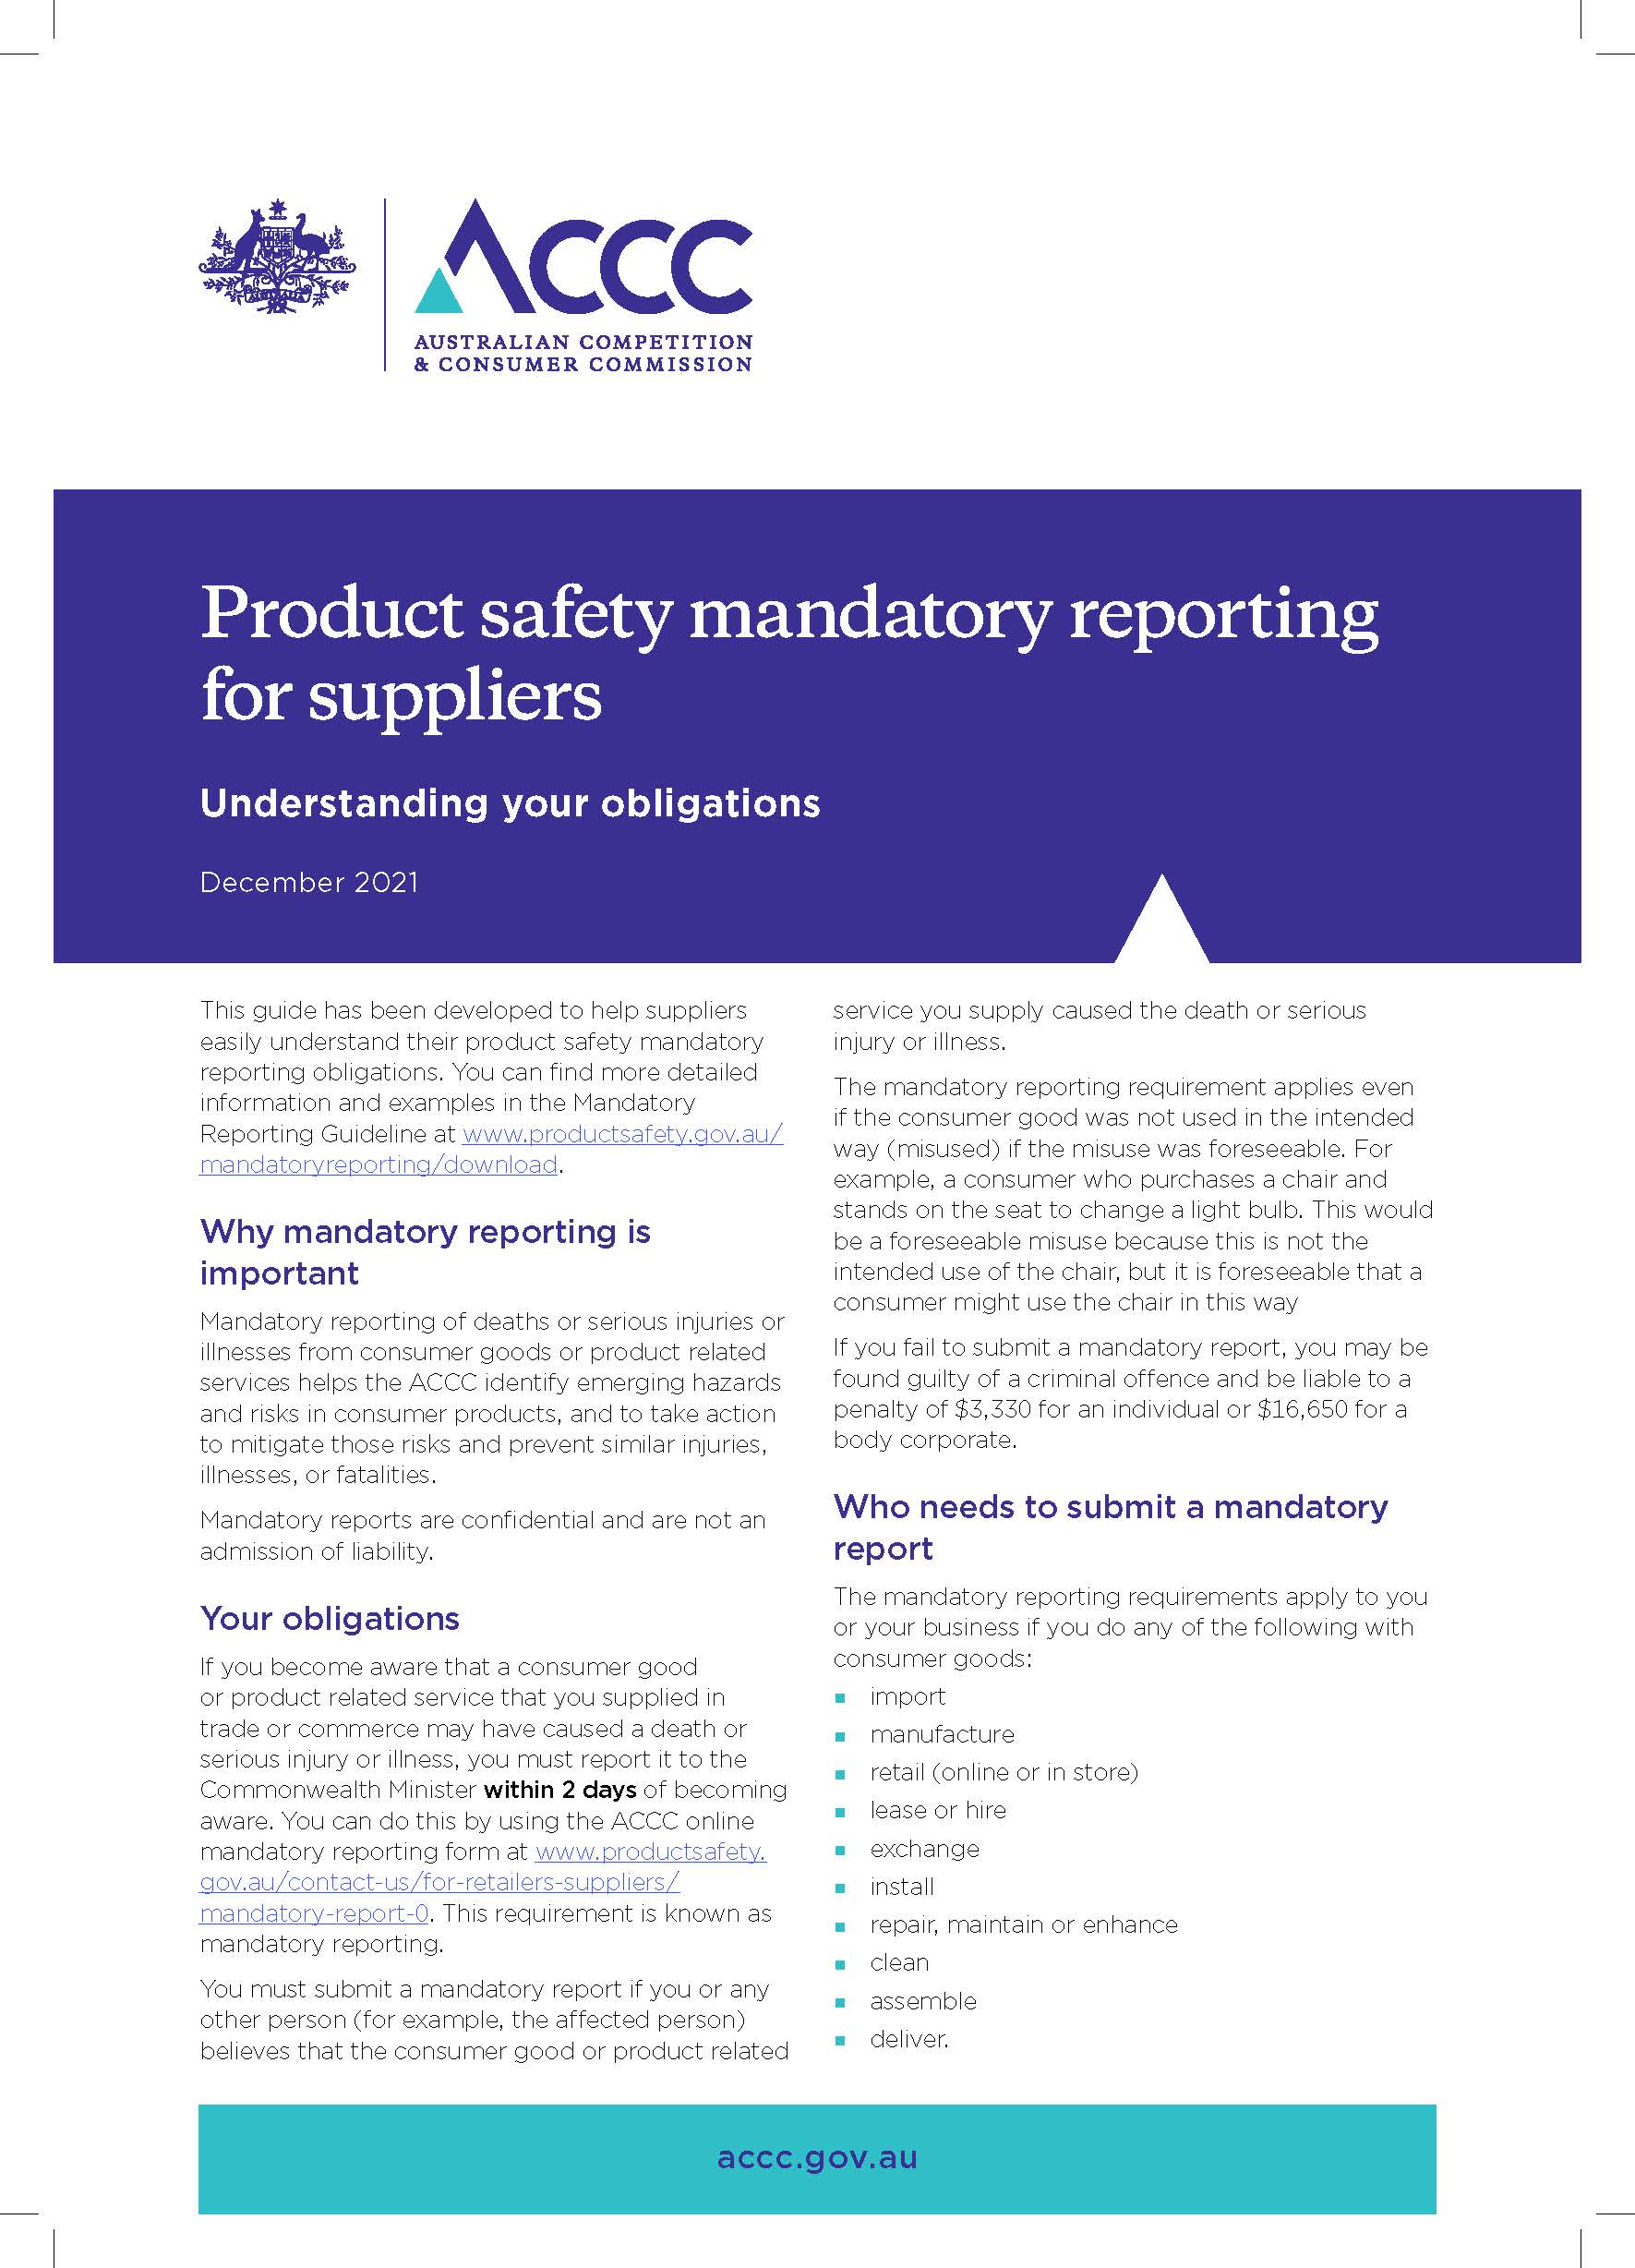 Product safety mandatory reporting for suppliers - Understanding your obligations